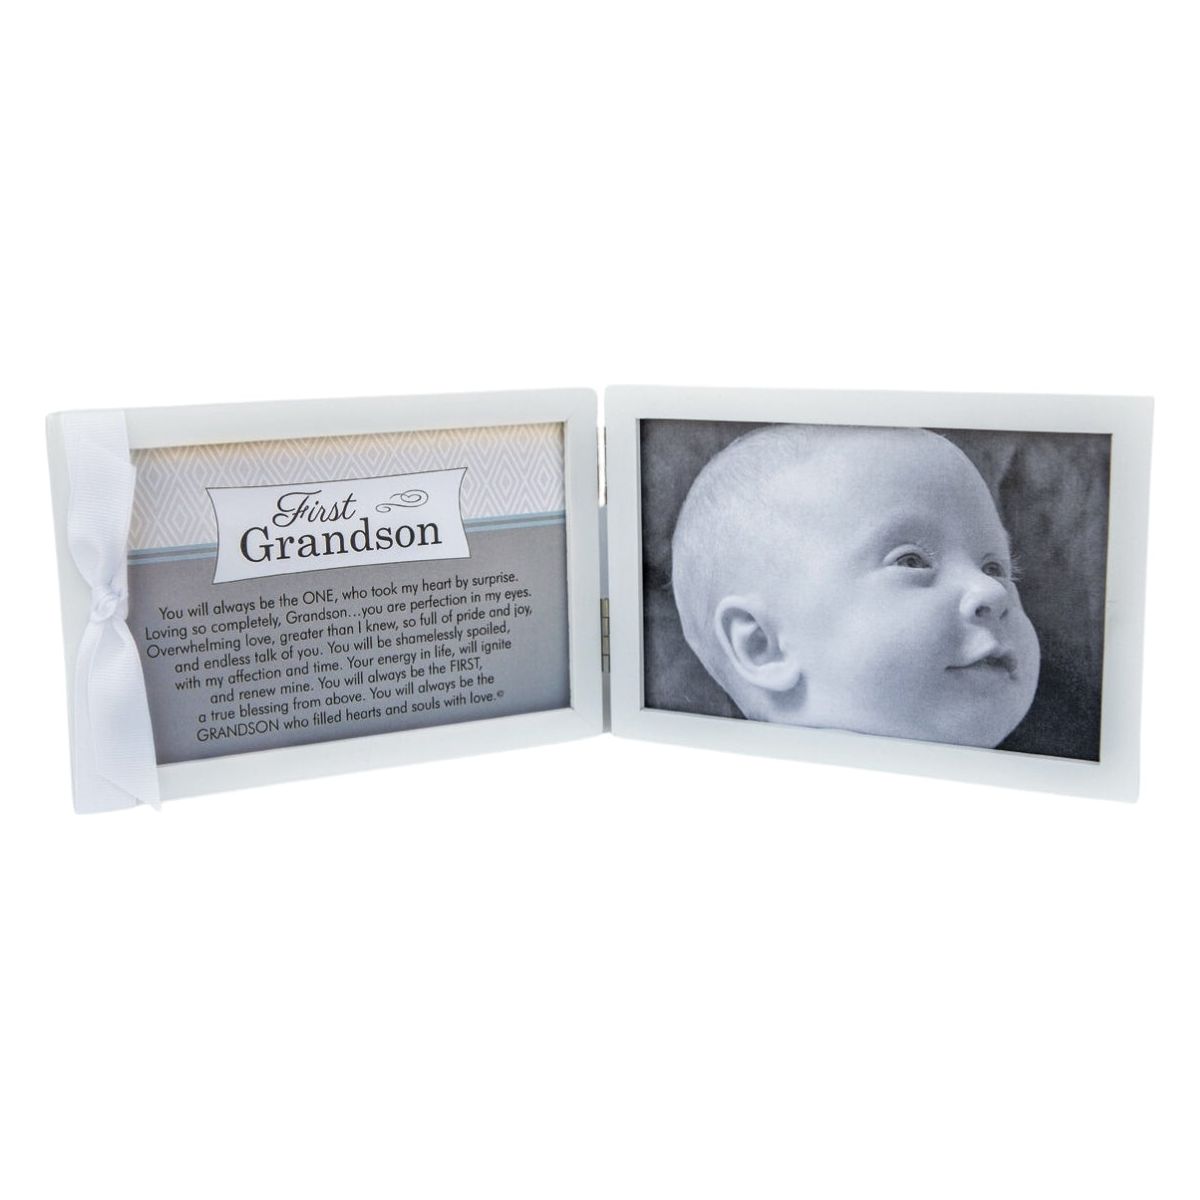 White 4x6 double wood frame with First Grandson sentiment and grosgrain ribbon on the left and space for a photo on the right.